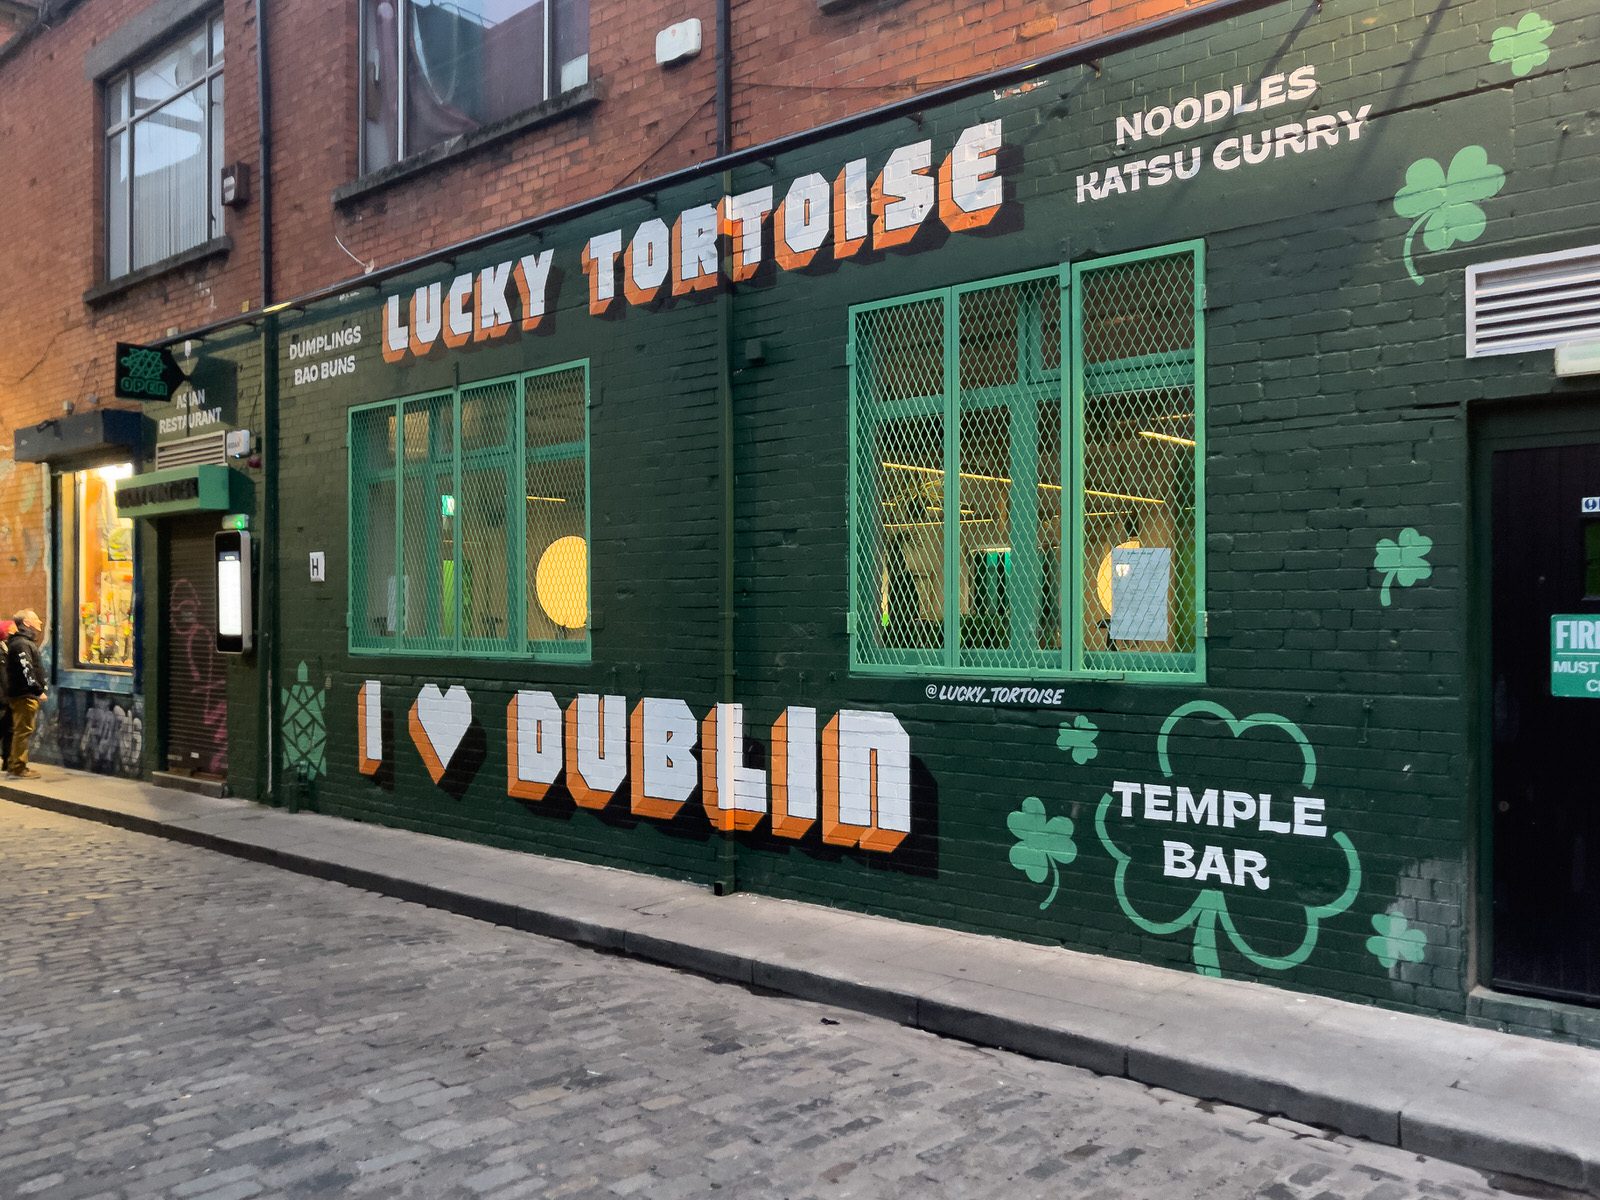 I VISITED TEMPLE BAR TODAY [AS NIGHTFALL WAS APPROACHING]-225337-1